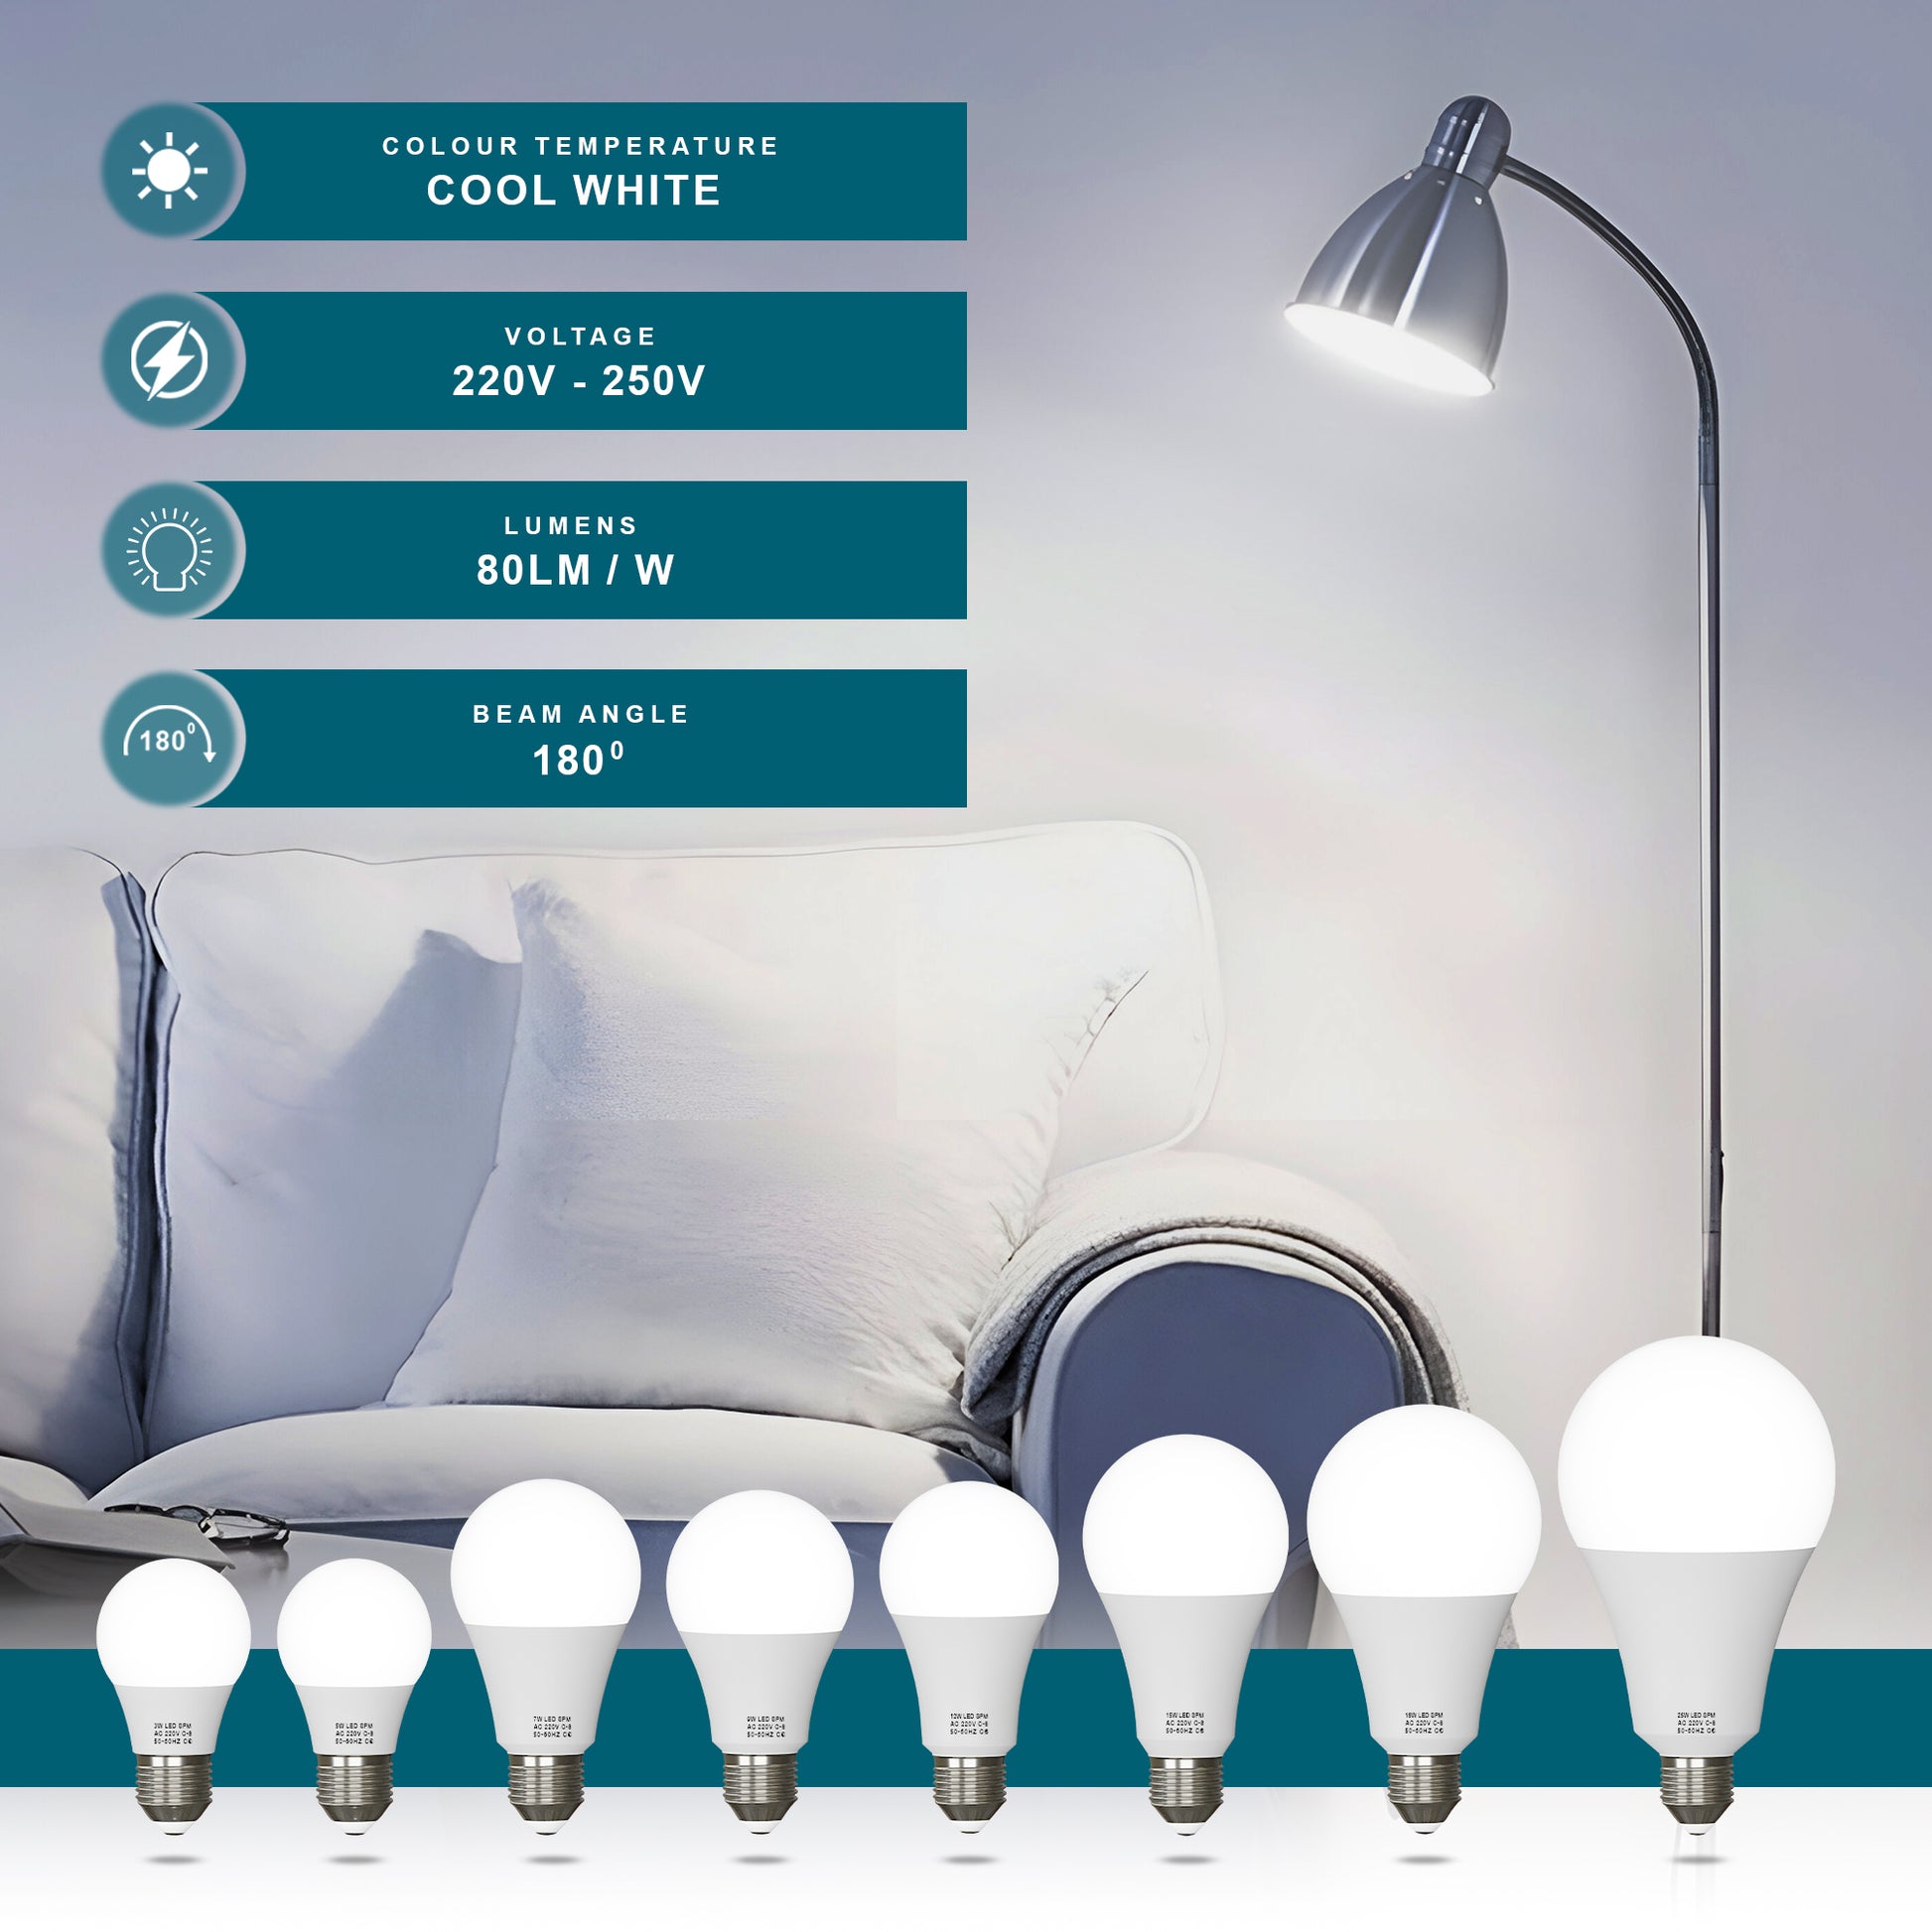 Non dimmable A60 LED Bulb